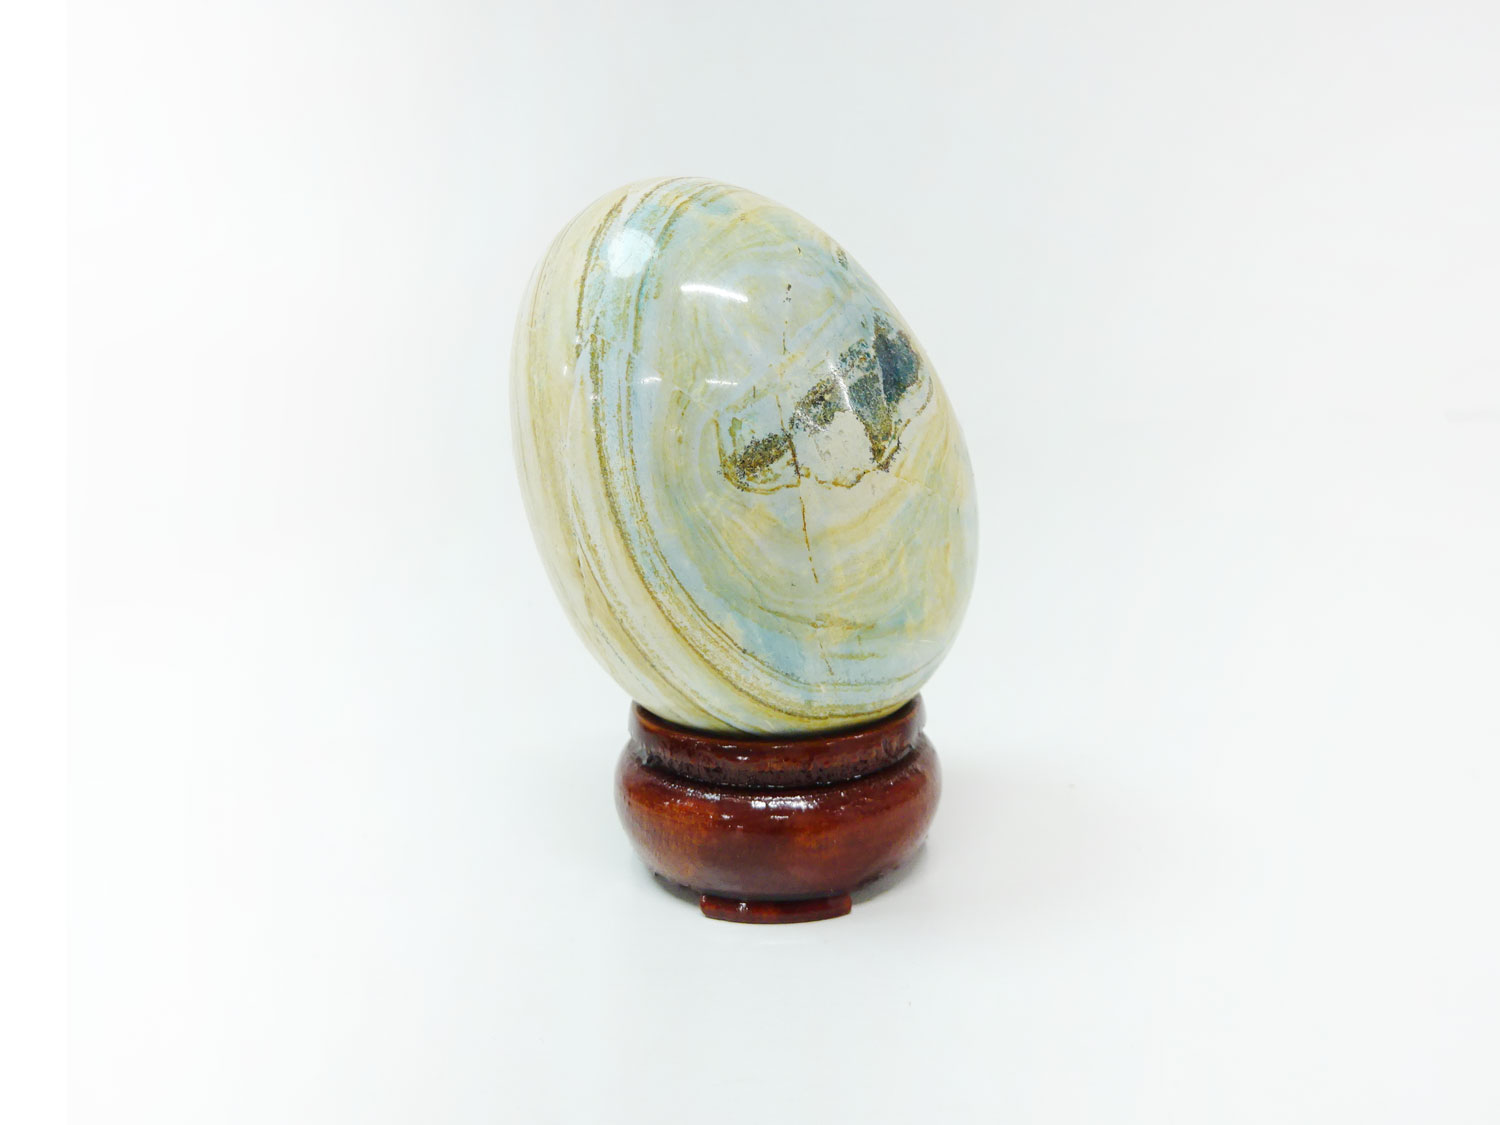 JAPANESE ORNAMENT / NATURAL CRYSTAL & MINERAL (stand not included) / HEALING CRYSTAL SPHERE